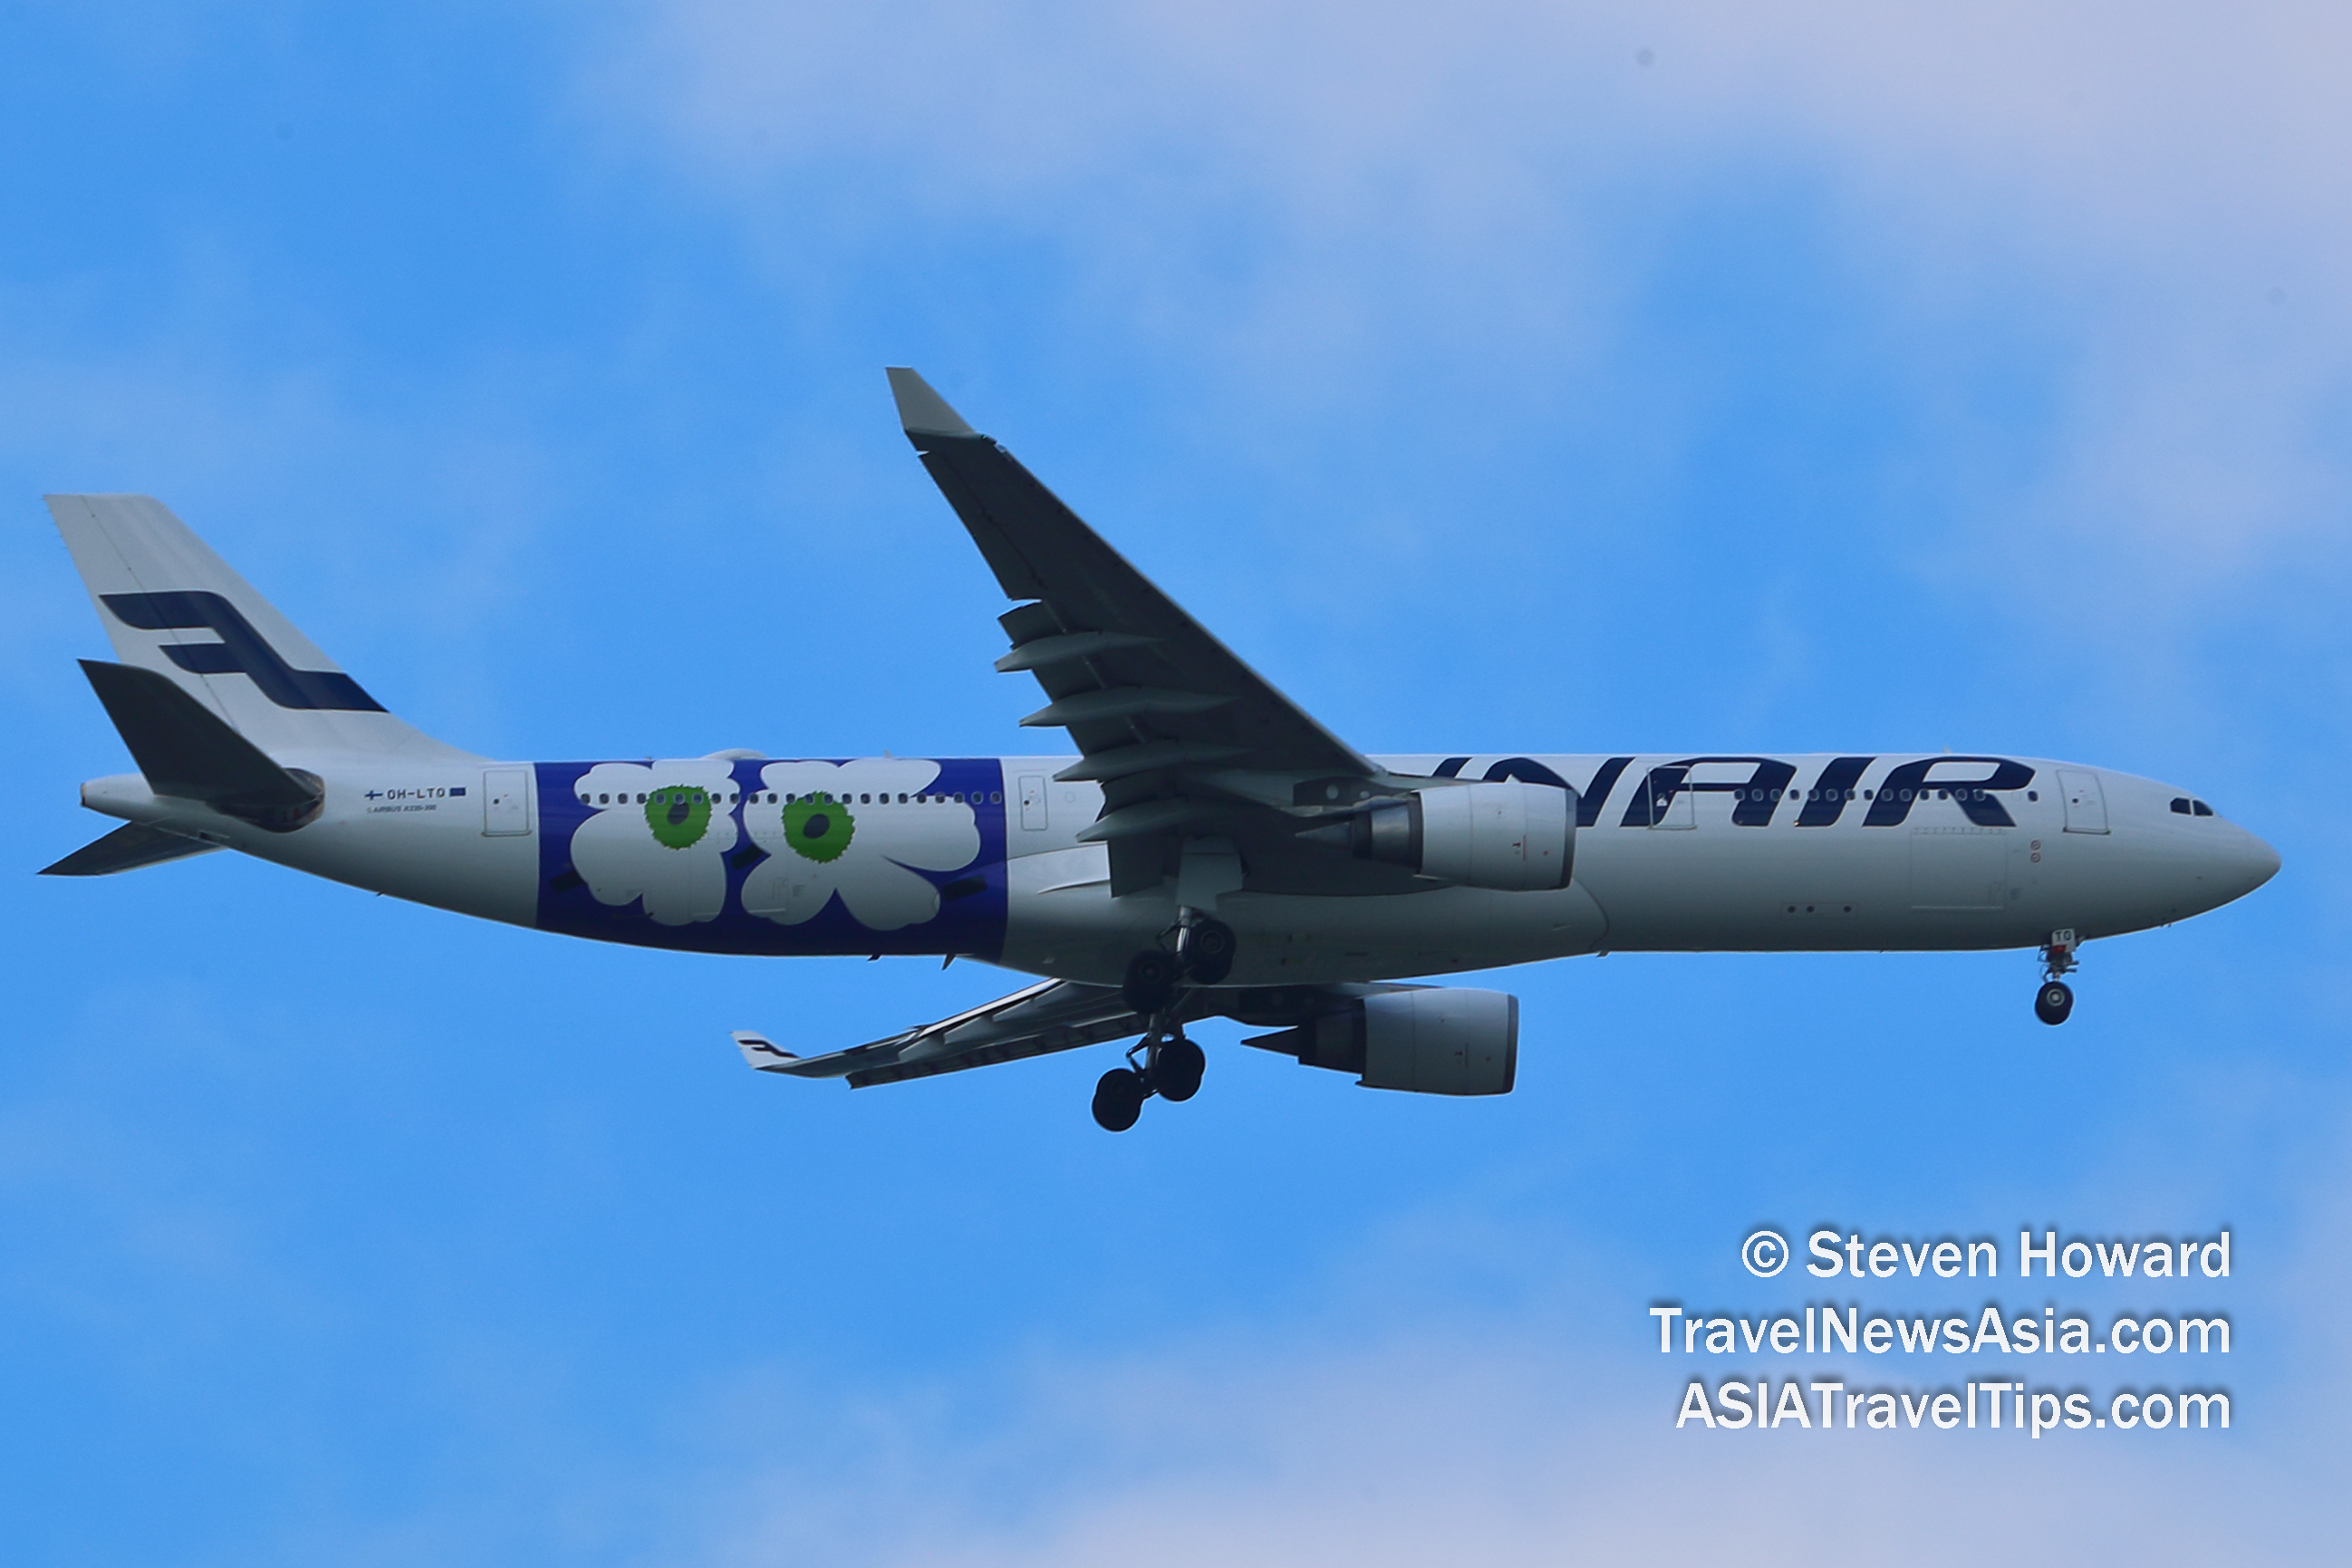 Finnair Airbus A330 reg: OH-LTO. Picture by Steven Howard of TravelNewsAsia.com Click to enlarge.